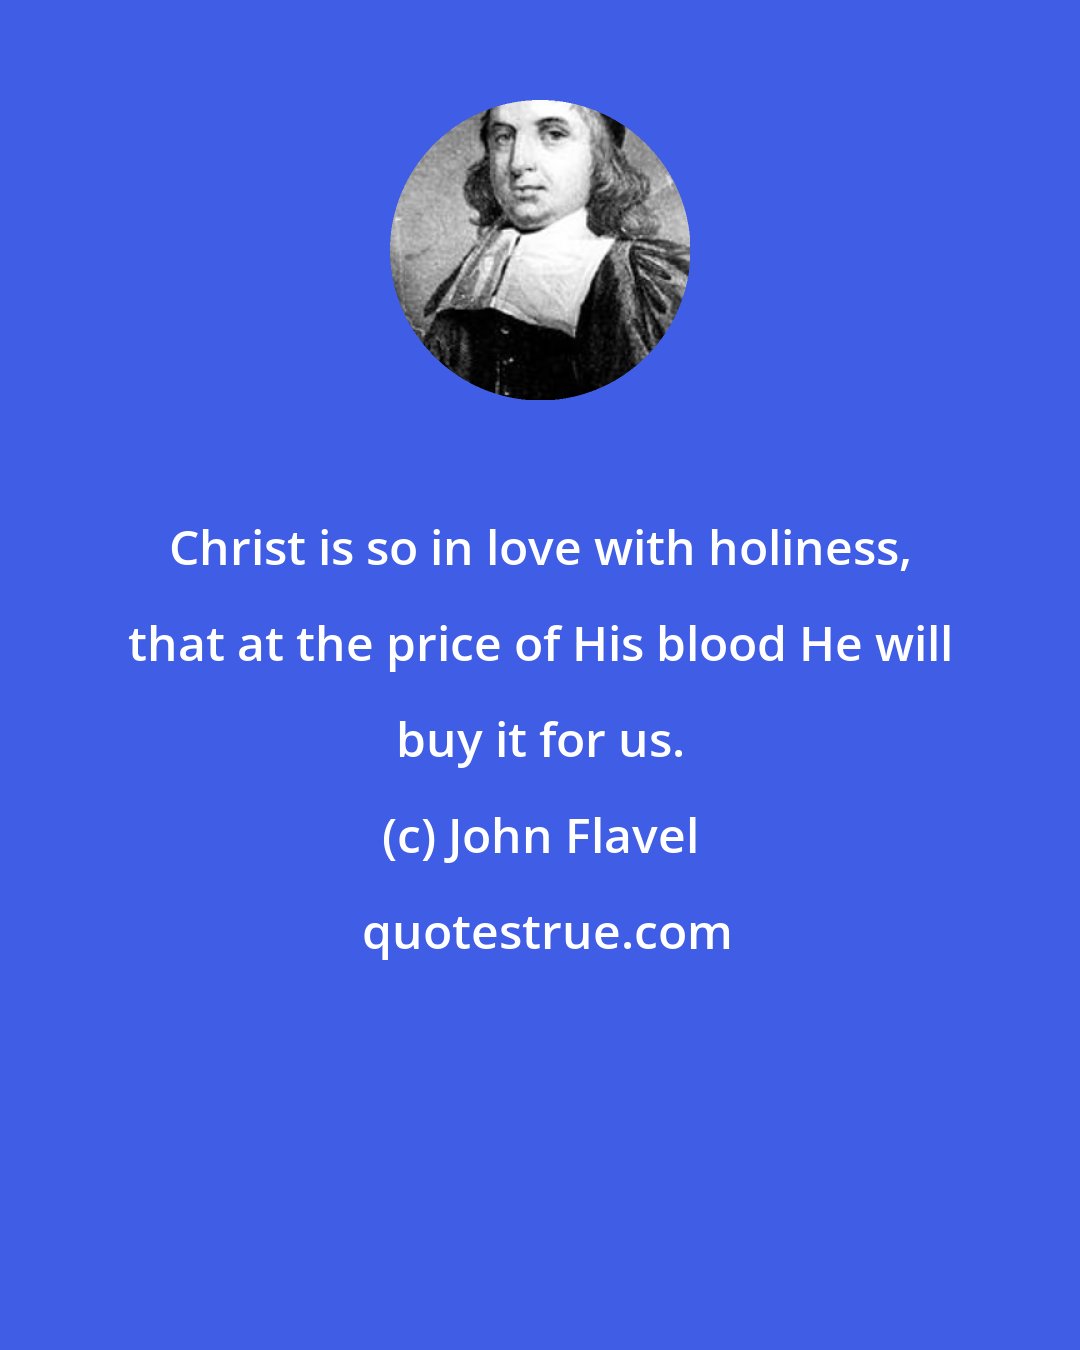 John Flavel: Christ is so in love with holiness, that at the price of His blood He will buy it for us.